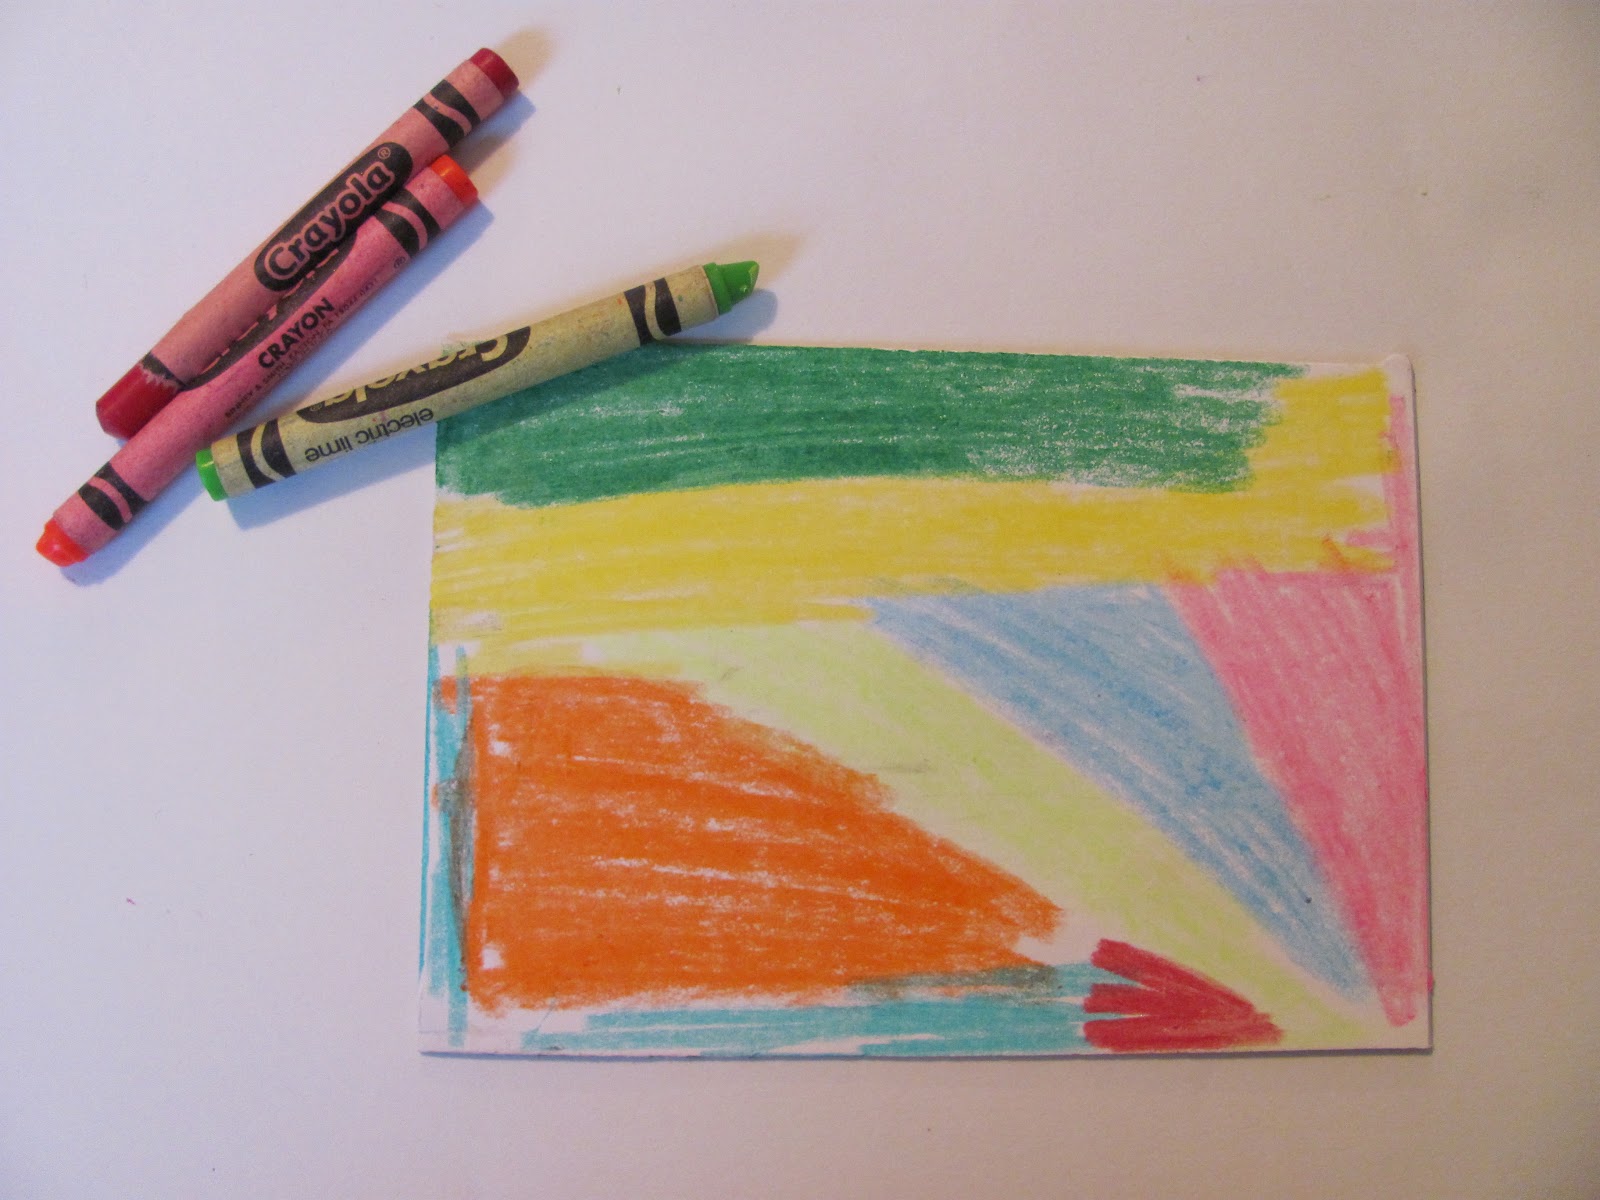 DIY Scratch Art with Crayon and Tempera Paint - Frugal Fun For